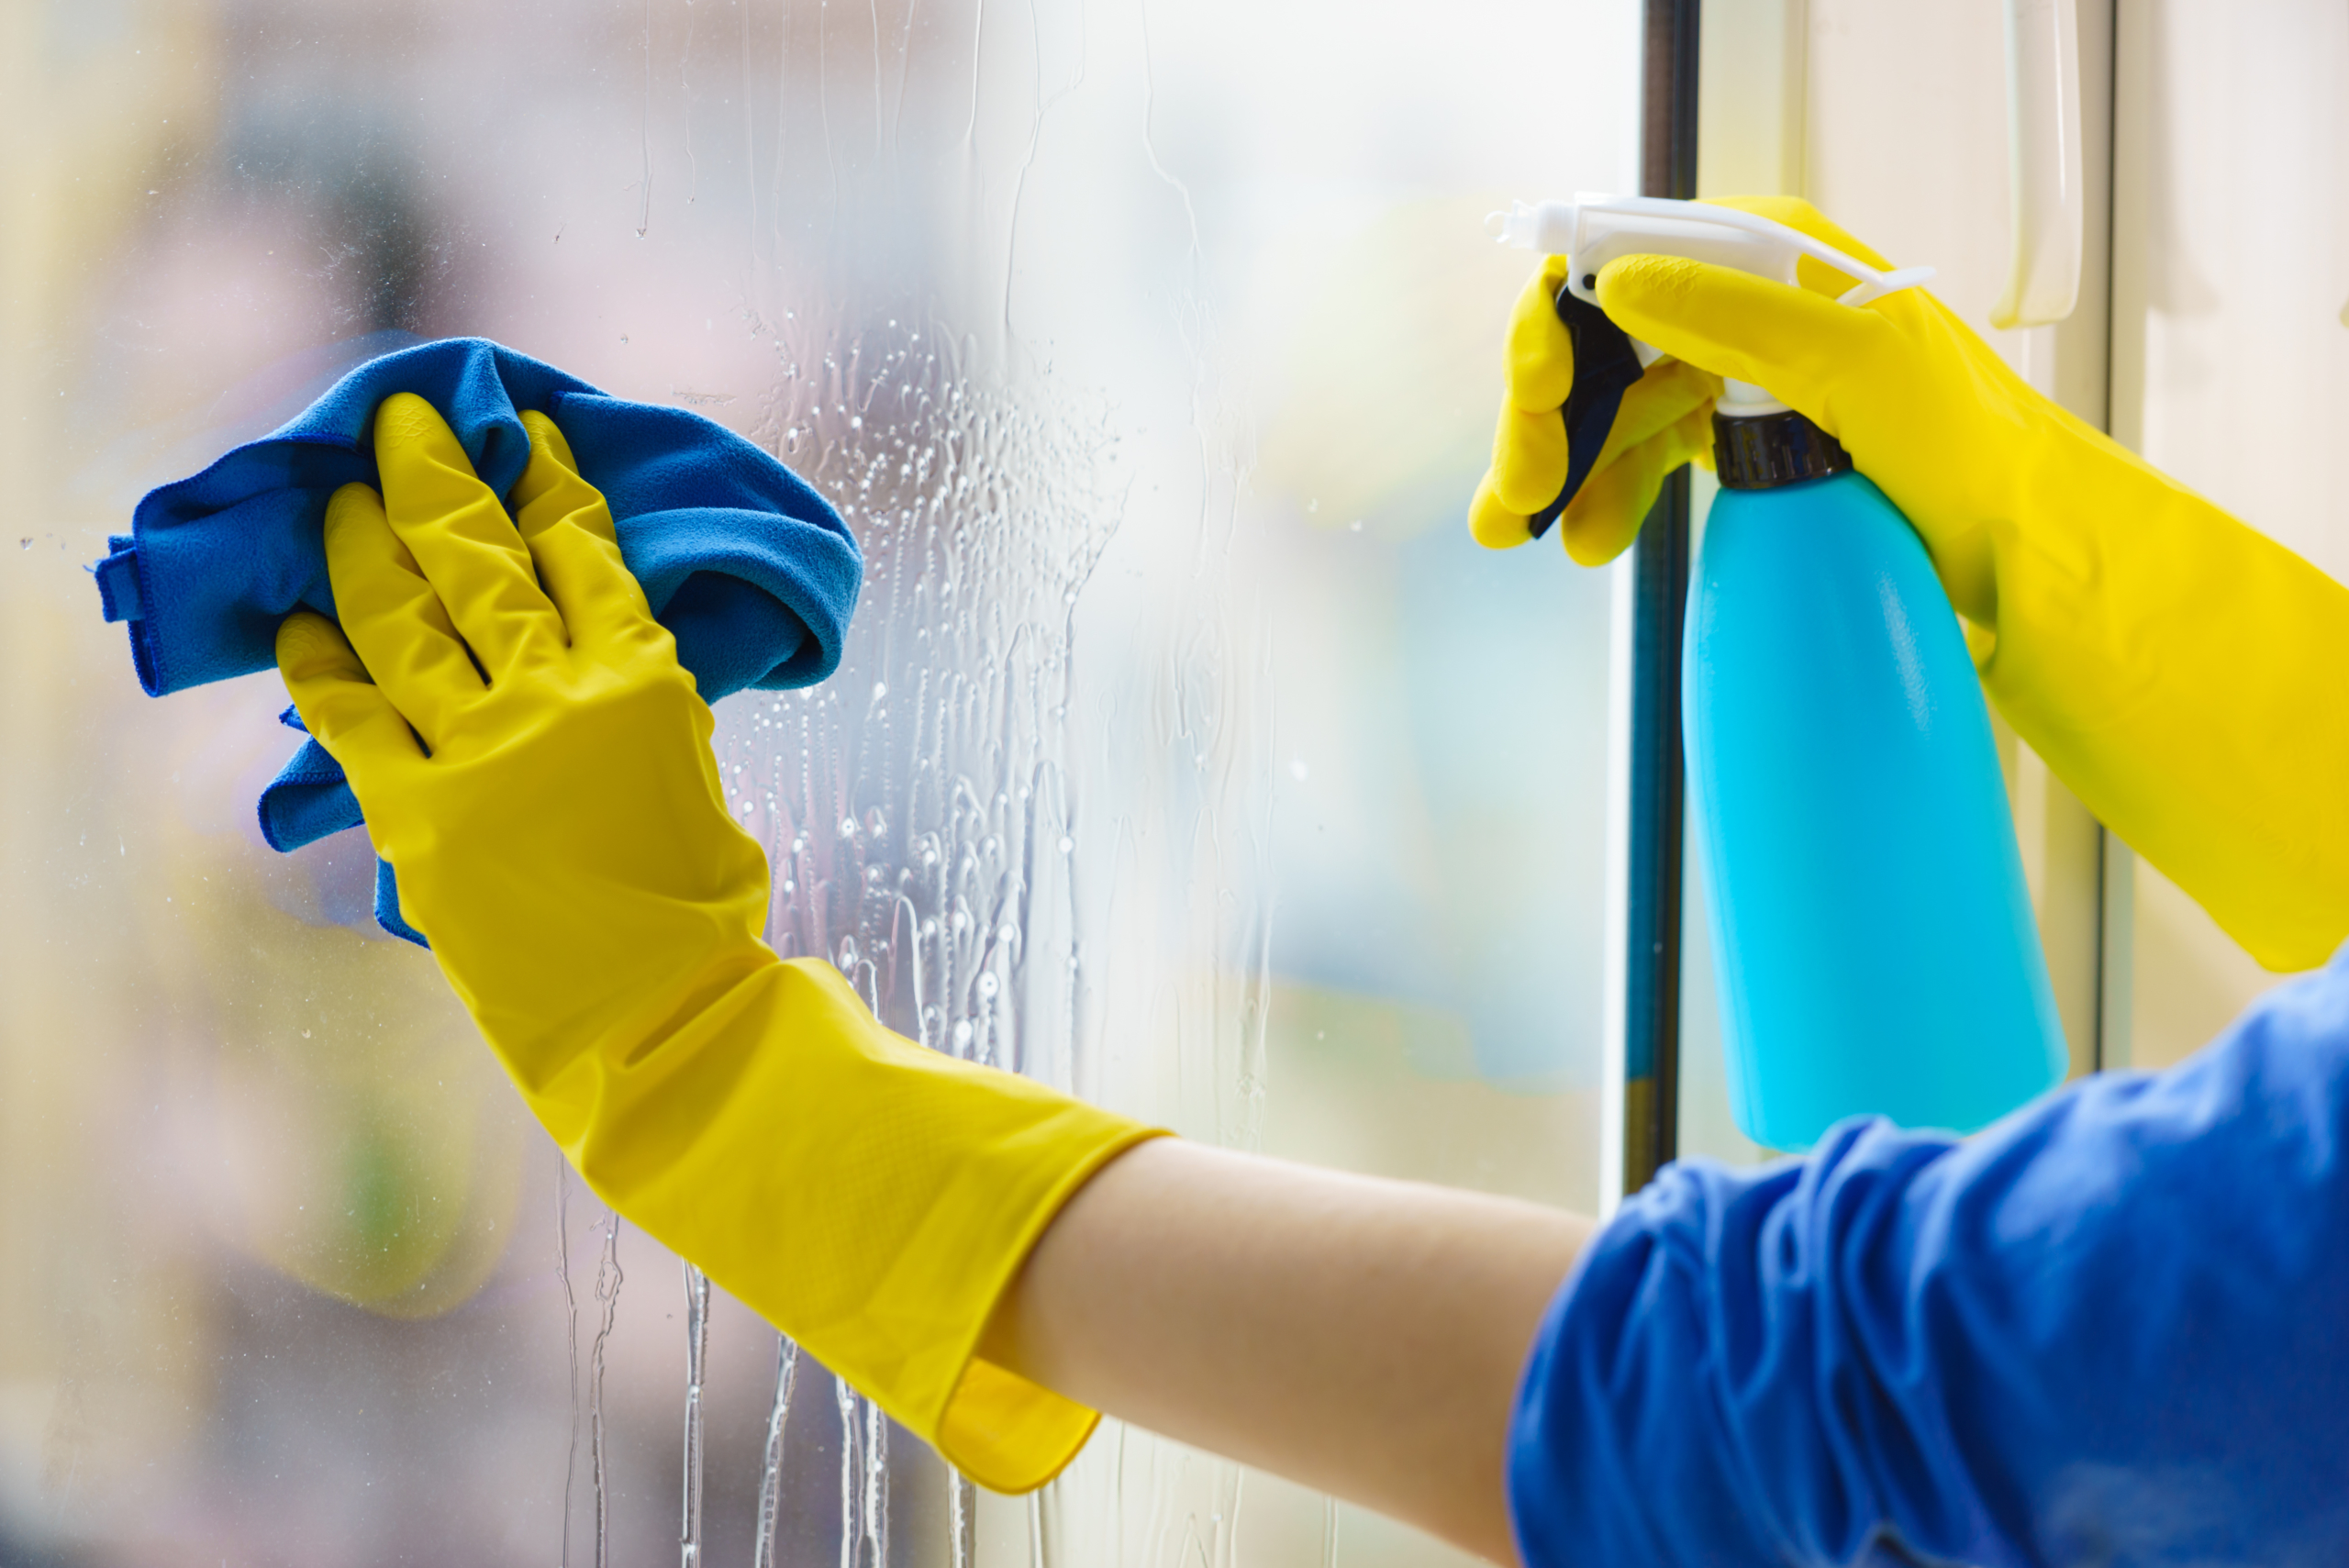 Gloved hand cleaning window rag and spray.